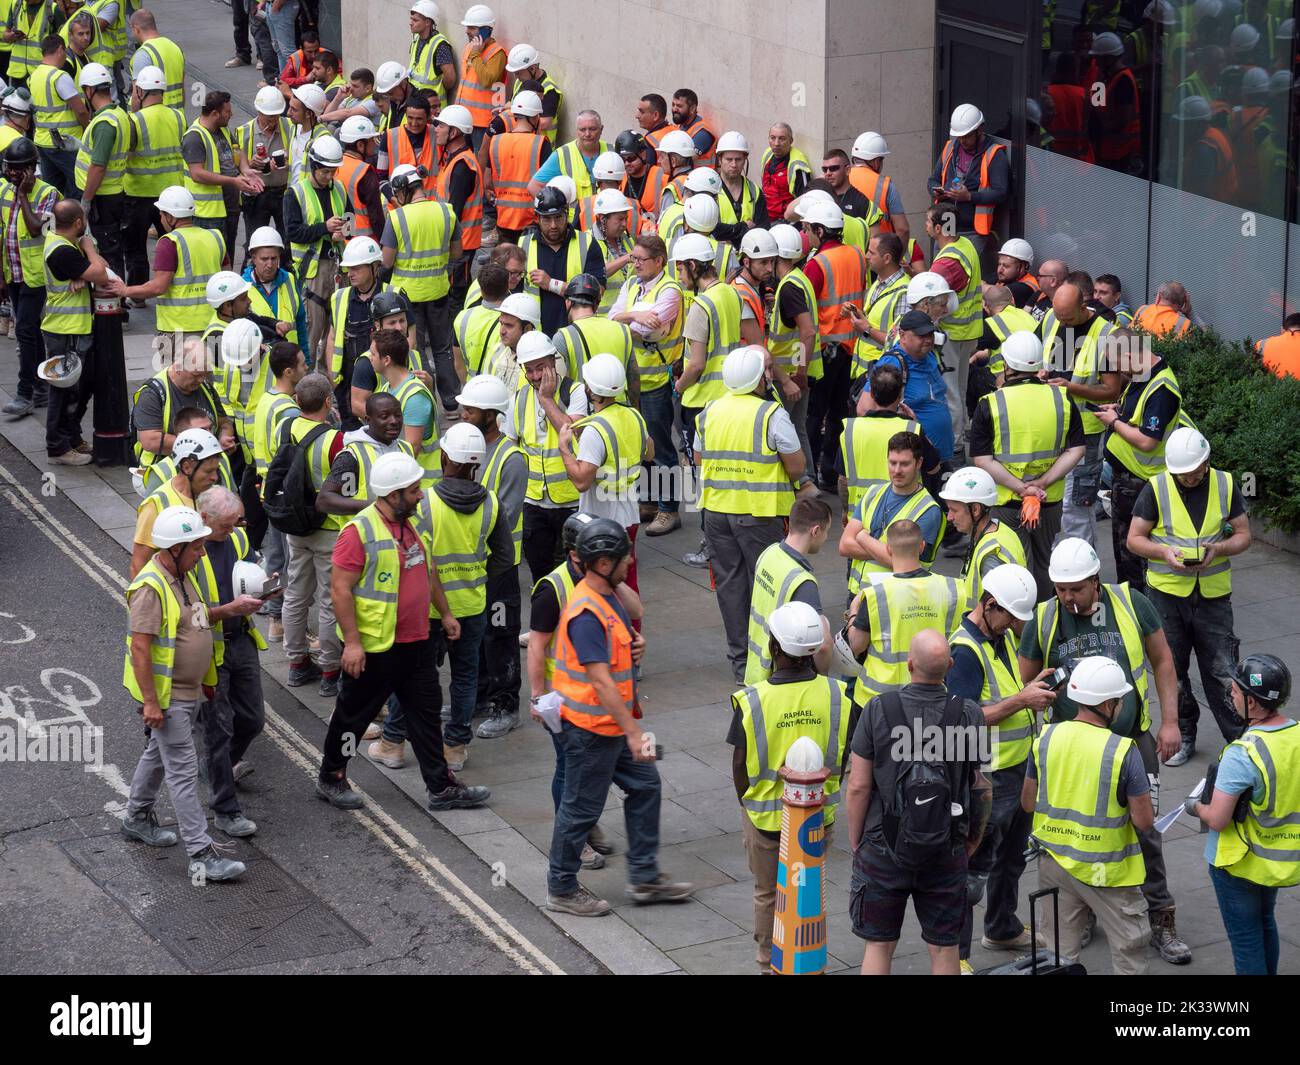 crowds of building workers and contractors wearing fluorescent jackets and hard hats assemble outside building during evacuation fire drill, Barbican London Stock Photo